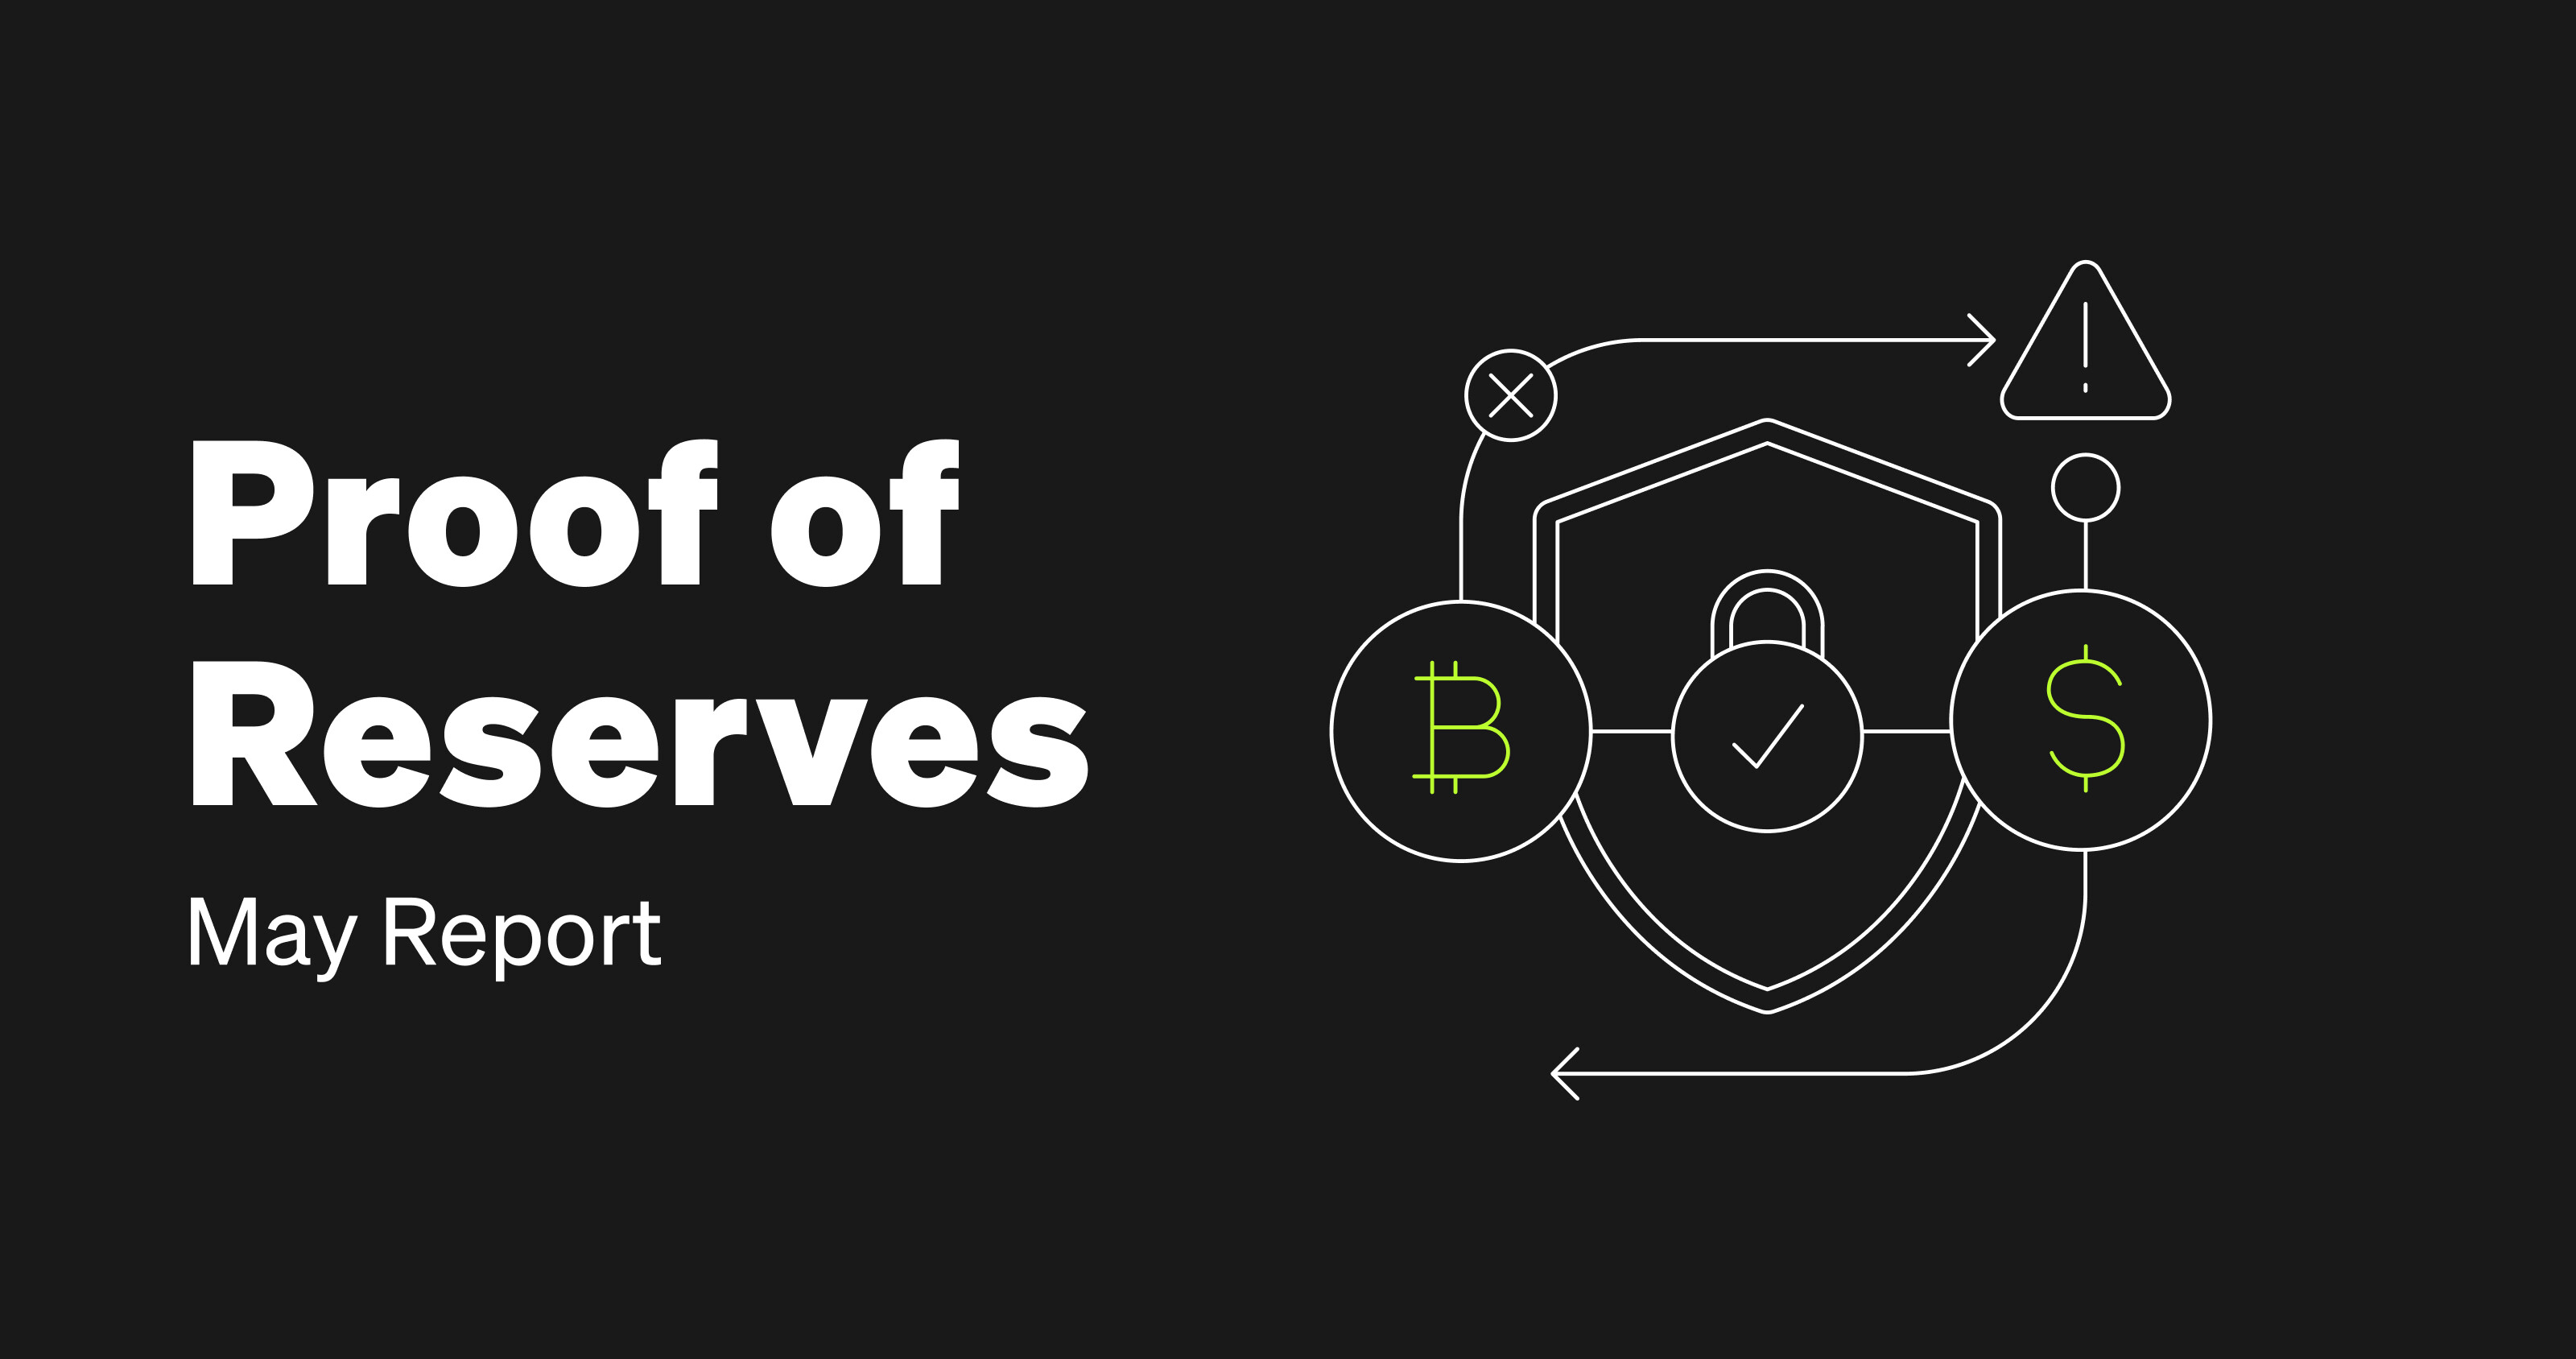 OKX Publishes Seventh Monthly Proof of Reserves, Showing USD$10 Billion in BTC, ETH and USDT